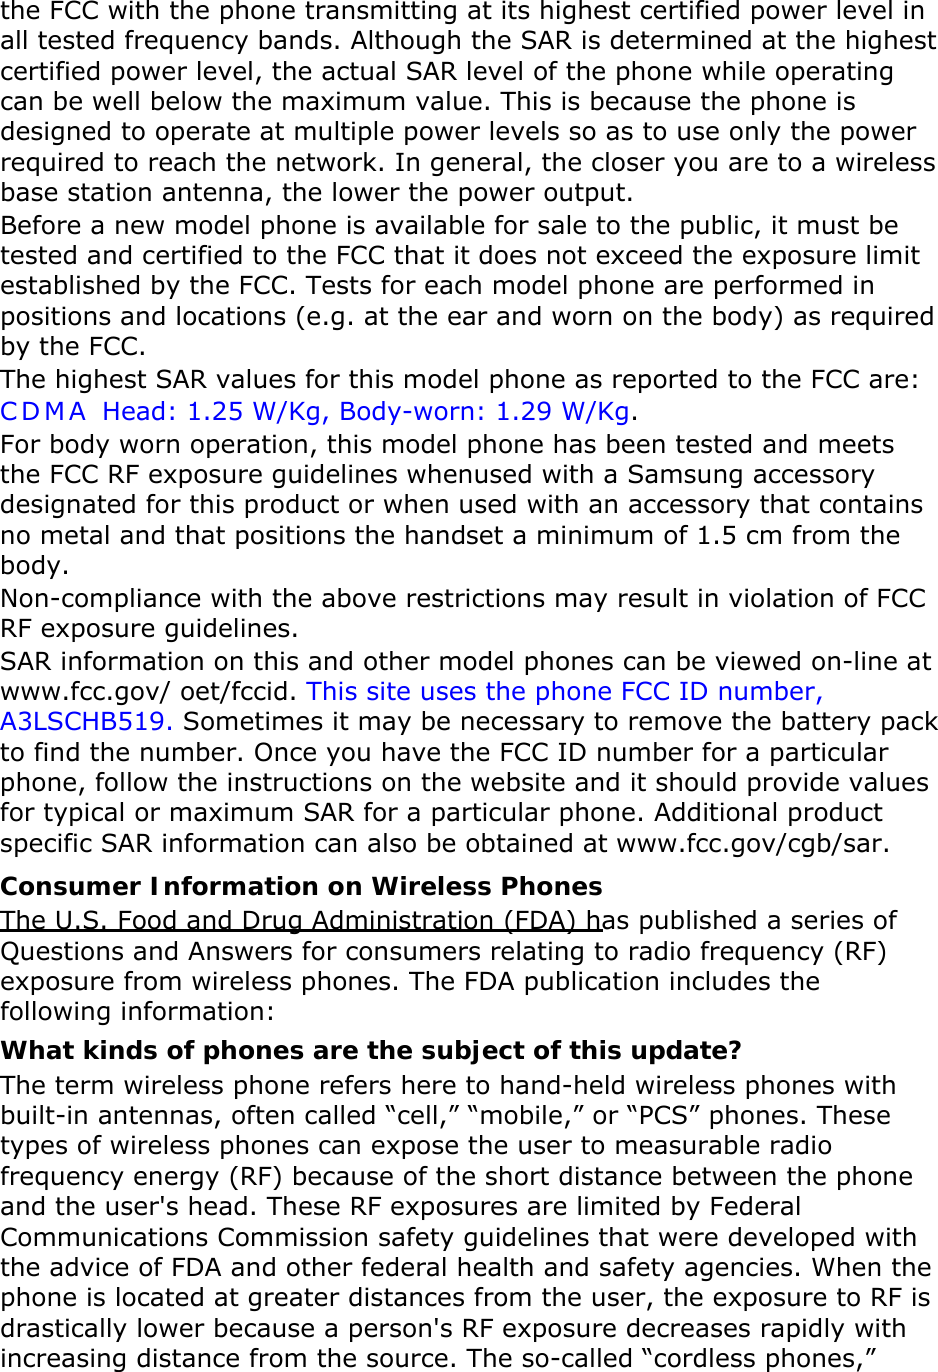 the FCC with the phone transmitting at its highest certified power level in all tested frequency bands. Although the SAR is determined at the highest certified power level, the actual SAR level of the phone while operating can be well below the maximum value. This is because the phone is designed to operate at multiple power levels so as to use only the power required to reach the network. In general, the closer you are to a wireless base station antenna, the lower the power output. Before a new model phone is available for sale to the public, it must be tested and certified to the FCC that it does not exceed the exposure limit established by the FCC. Tests for each model phone are performed in positions and locations (e.g. at the ear and worn on the body) as required by the FCC.     The highest SAR values for this model phone as reported to the FCC are:  CDMA Head: 1.25 W/Kg, Body-worn: 1.29 W/Kg. For body worn operation, this model phone has been tested and meets the FCC RF exposure guidelines whenused with a Samsung accessory designated for this product or when used with an accessory that contains no metal and that positions the handset a minimum of 1.5 cm from the body.  Non-compliance with the above restrictions may result in violation of FCC RF exposure guidelines. SAR information on this and other model phones can be viewed on-line at www.fcc.gov/ oet/fccid. This site uses the phone FCC ID number, A3LSCHB519. Sometimes it may be necessary to remove the battery pack to find the number. Once you have the FCC ID number for a particular phone, follow the instructions on the website and it should provide values for typical or maximum SAR for a particular phone. Additional product specific SAR information can also be obtained at www.fcc.gov/cgb/sar. Consumer Information on Wireless Phones The U.S. Food and Drug Administration (FDA) has published a series of Questions and Answers for consumers relating to radio frequency (RF) exposure from wireless phones. The FDA publication includes the following information: What kinds of phones are the subject of this update? The term wireless phone refers here to hand-held wireless phones with built-in antennas, often called “cell,” “mobile,” or “PCS” phones. These types of wireless phones can expose the user to measurable radio frequency energy (RF) because of the short distance between the phone and the user&apos;s head. These RF exposures are limited by Federal Communications Commission safety guidelines that were developed with the advice of FDA and other federal health and safety agencies. When the phone is located at greater distances from the user, the exposure to RF is drastically lower because a person&apos;s RF exposure decreases rapidly with increasing distance from the source. The so-called “cordless phones,” 